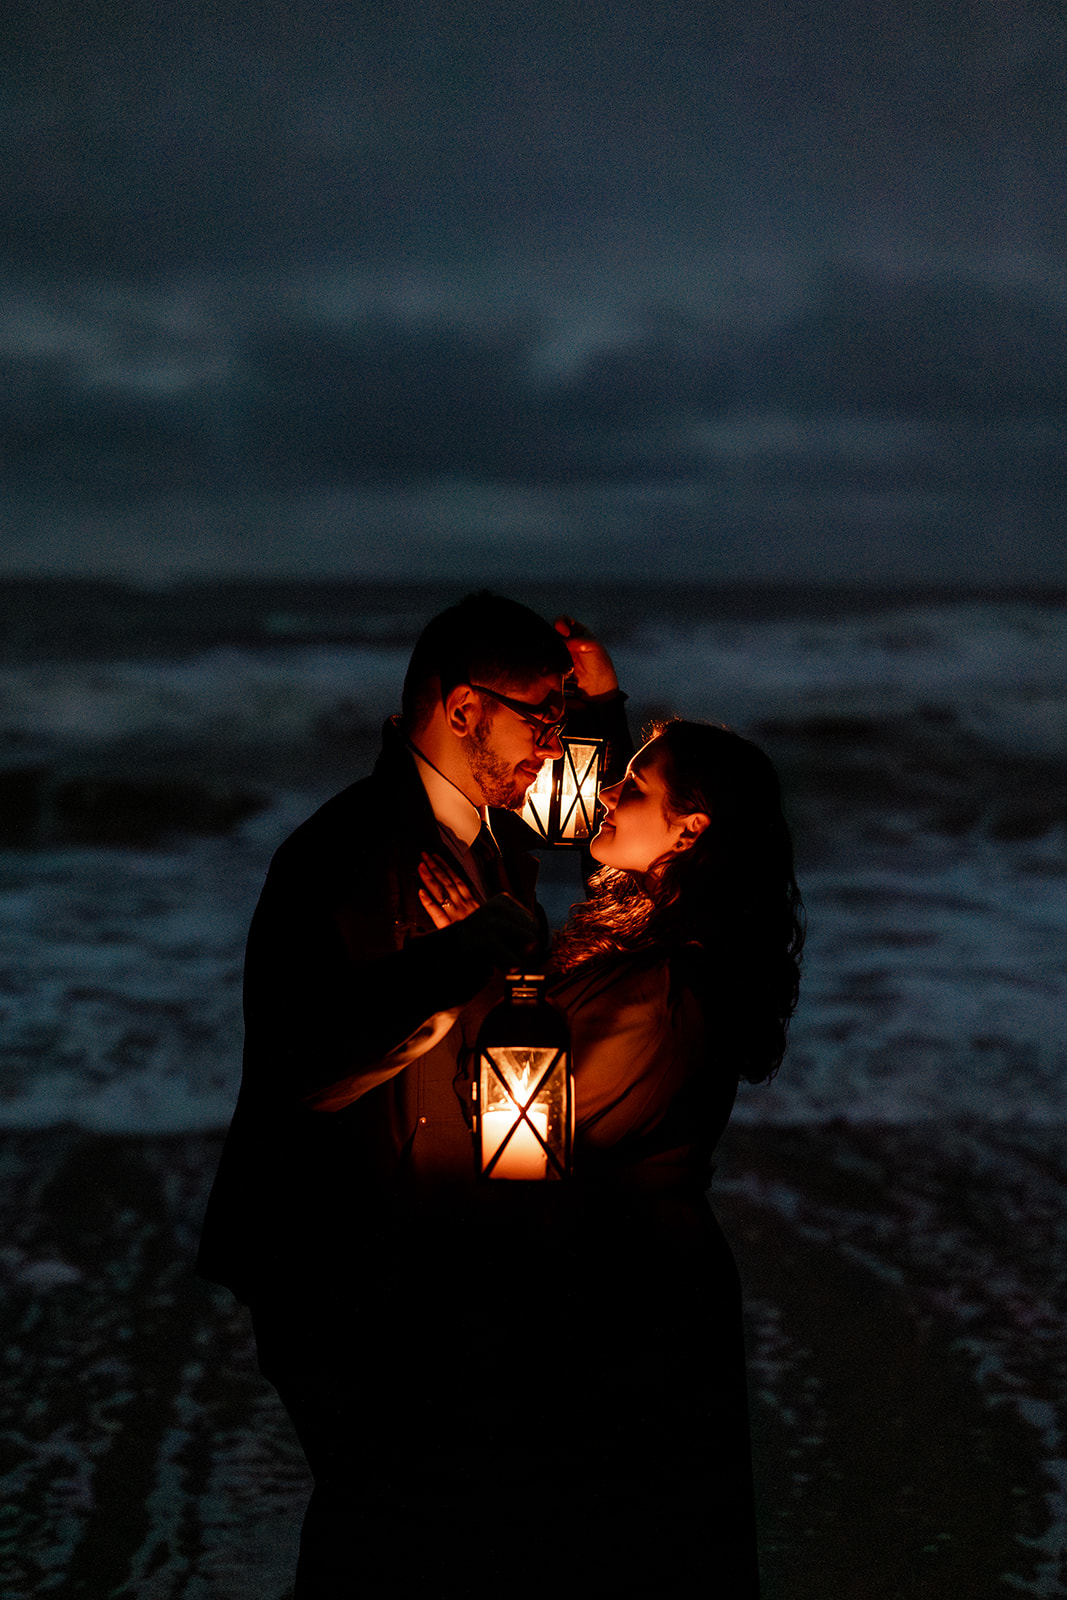 Seattle wedding photographer captures engagement photos in the Olympic National Park in the ocean